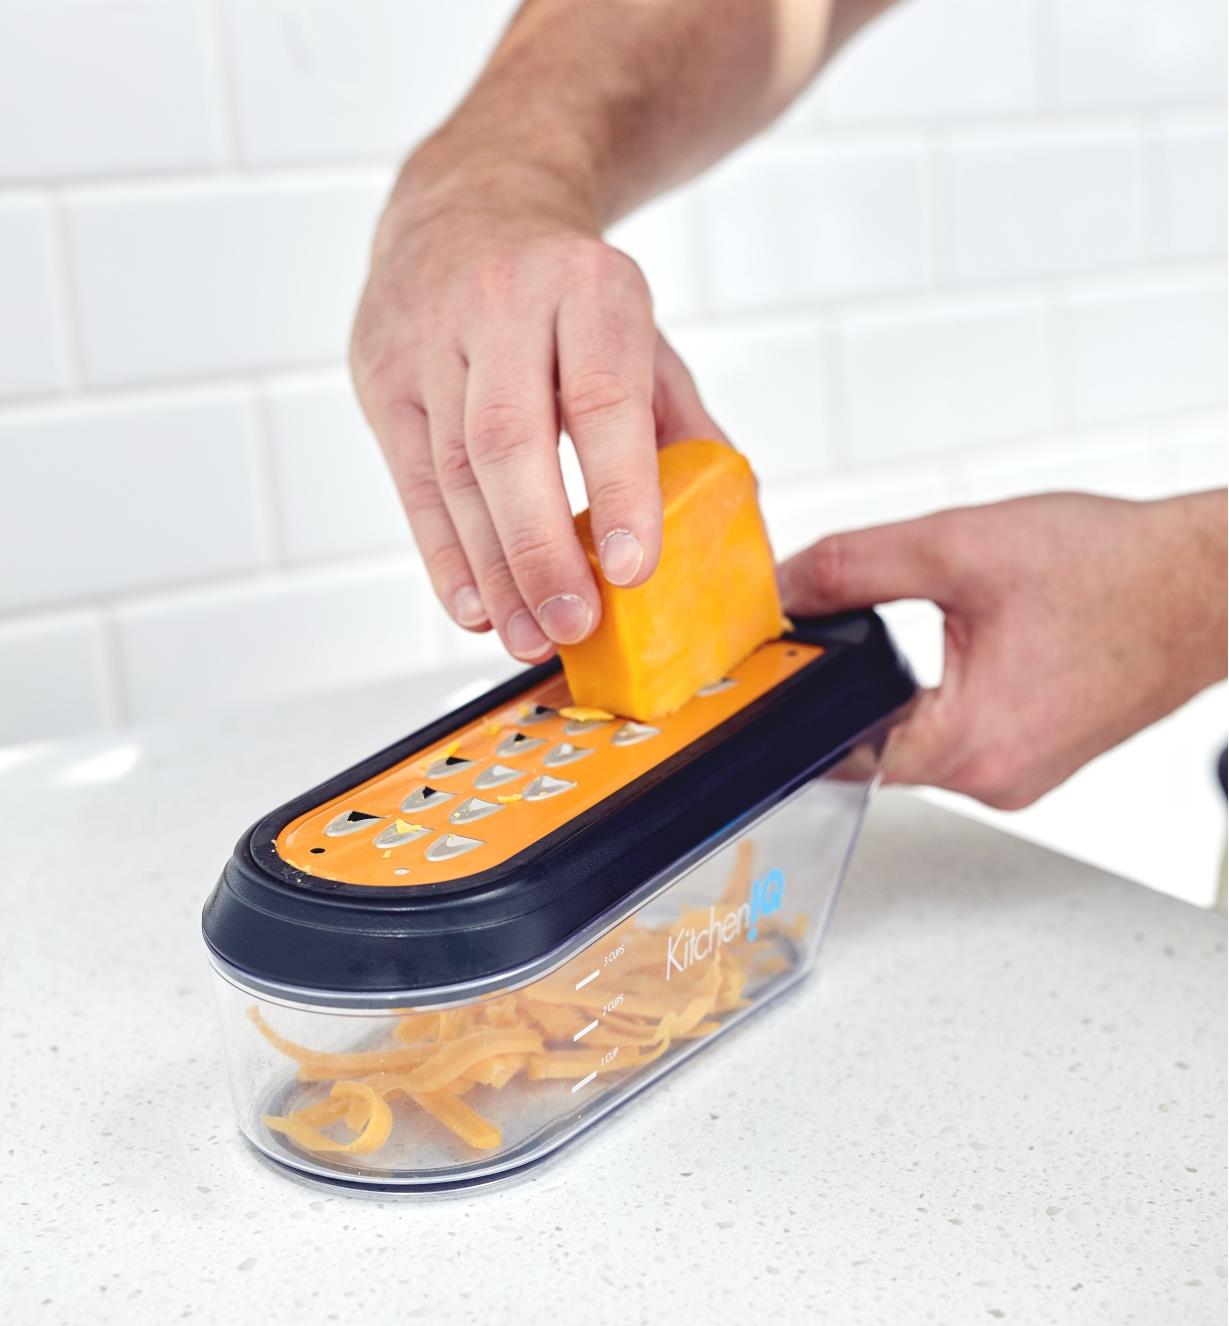 Shredding cheese with the container grater